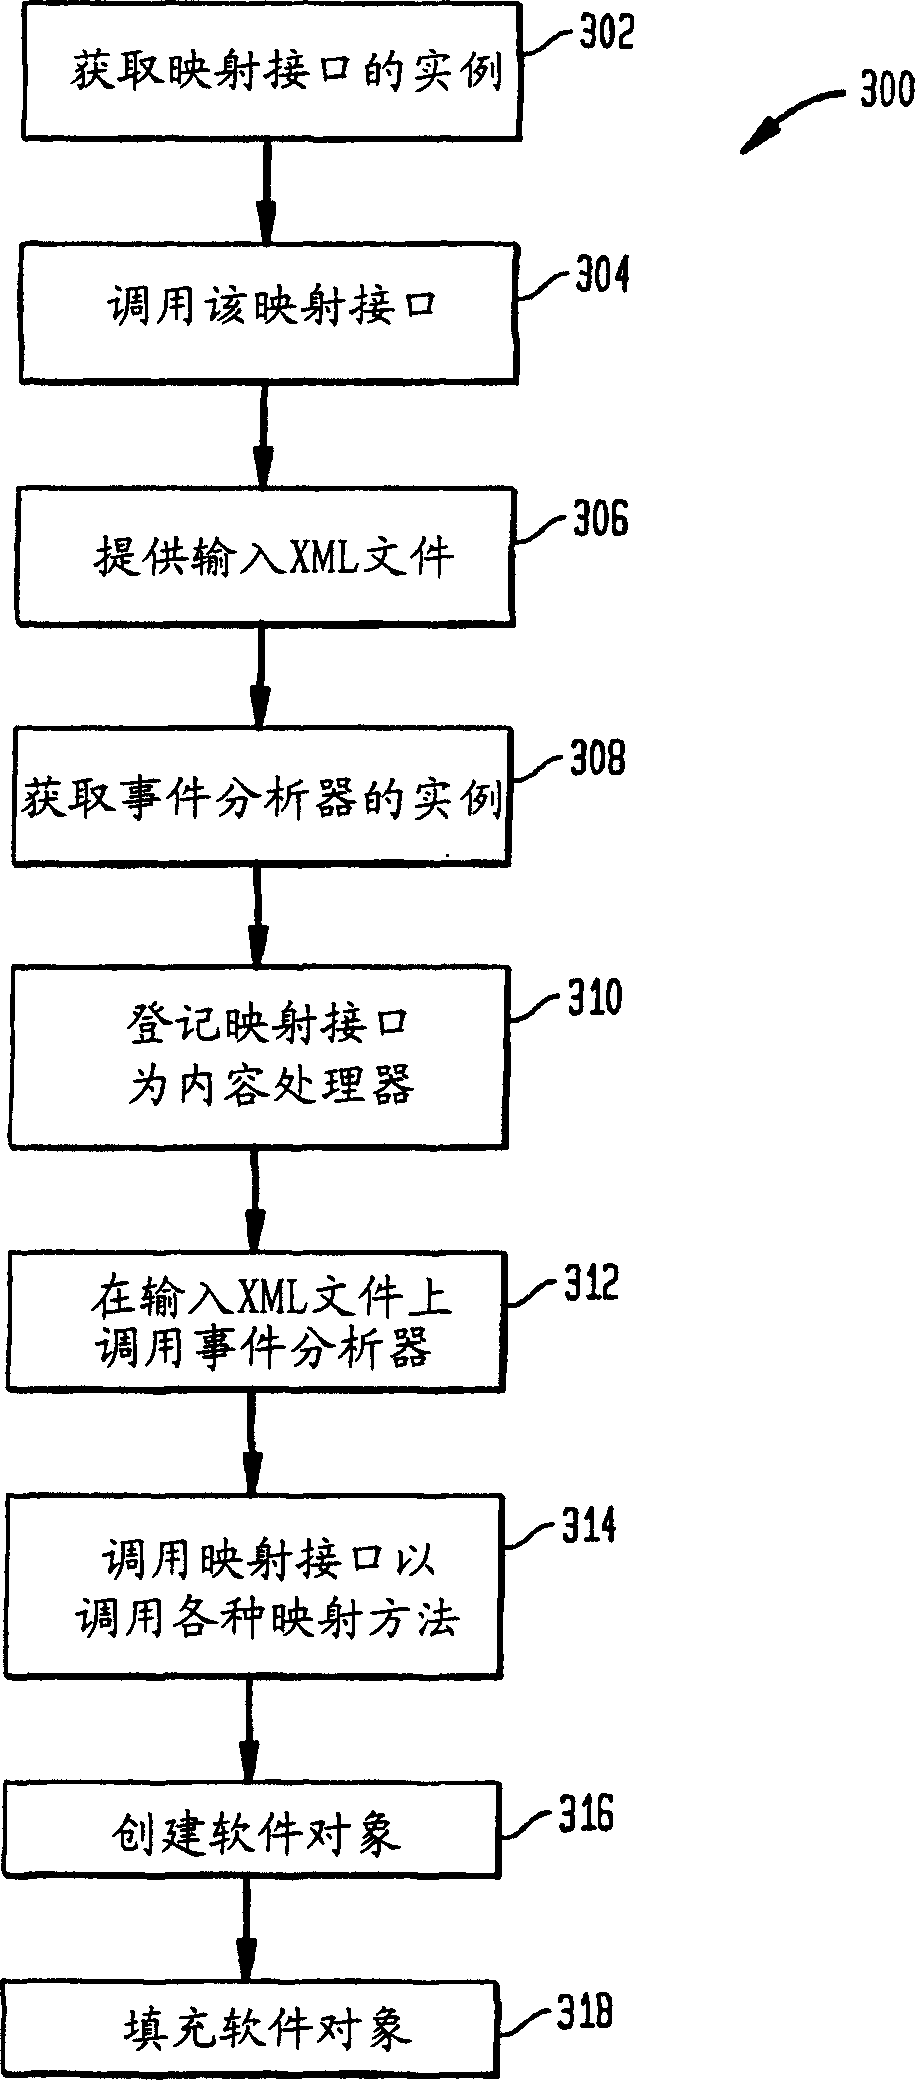 System and method of mapping between software objects and structure languige element-based documents